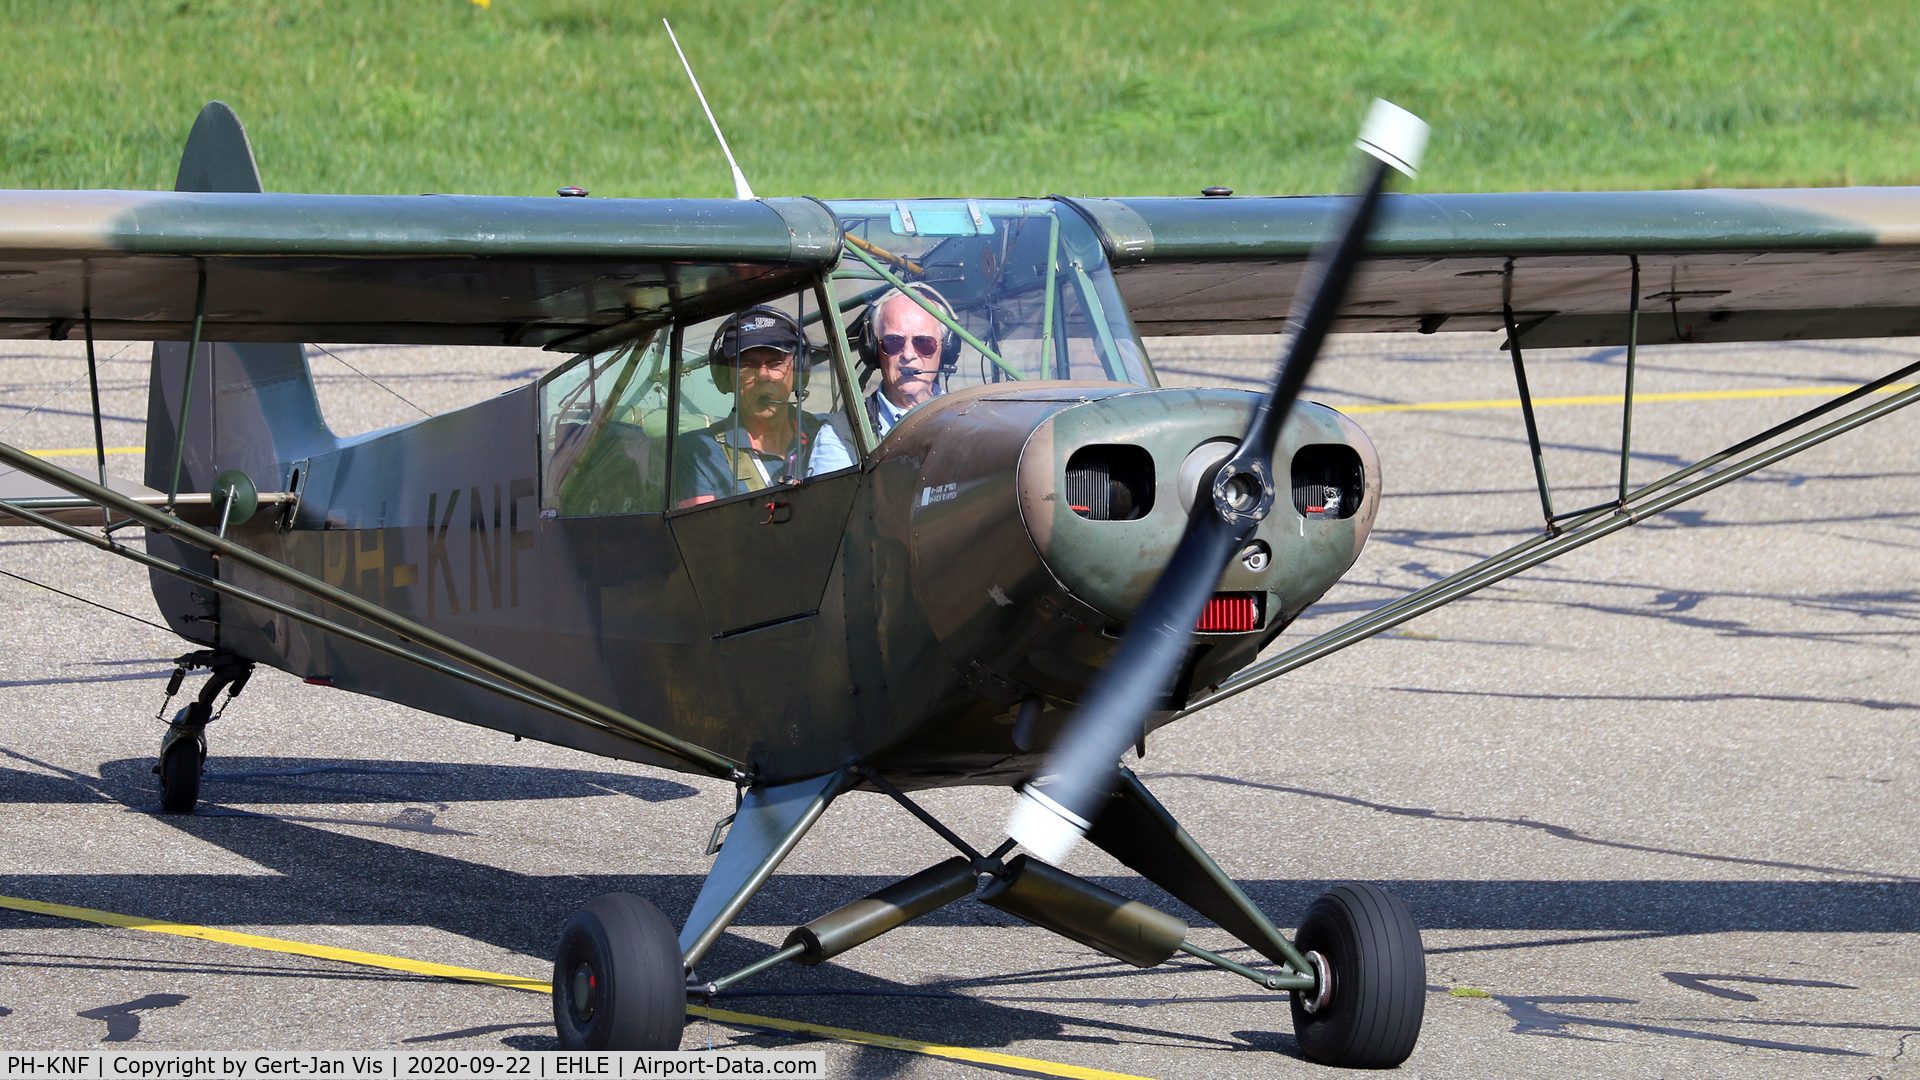 PH-KNF, 1954 Piper L-21B-135 Super Cub (PA-18-135) C/N 18-3826, With my old man behind the stick